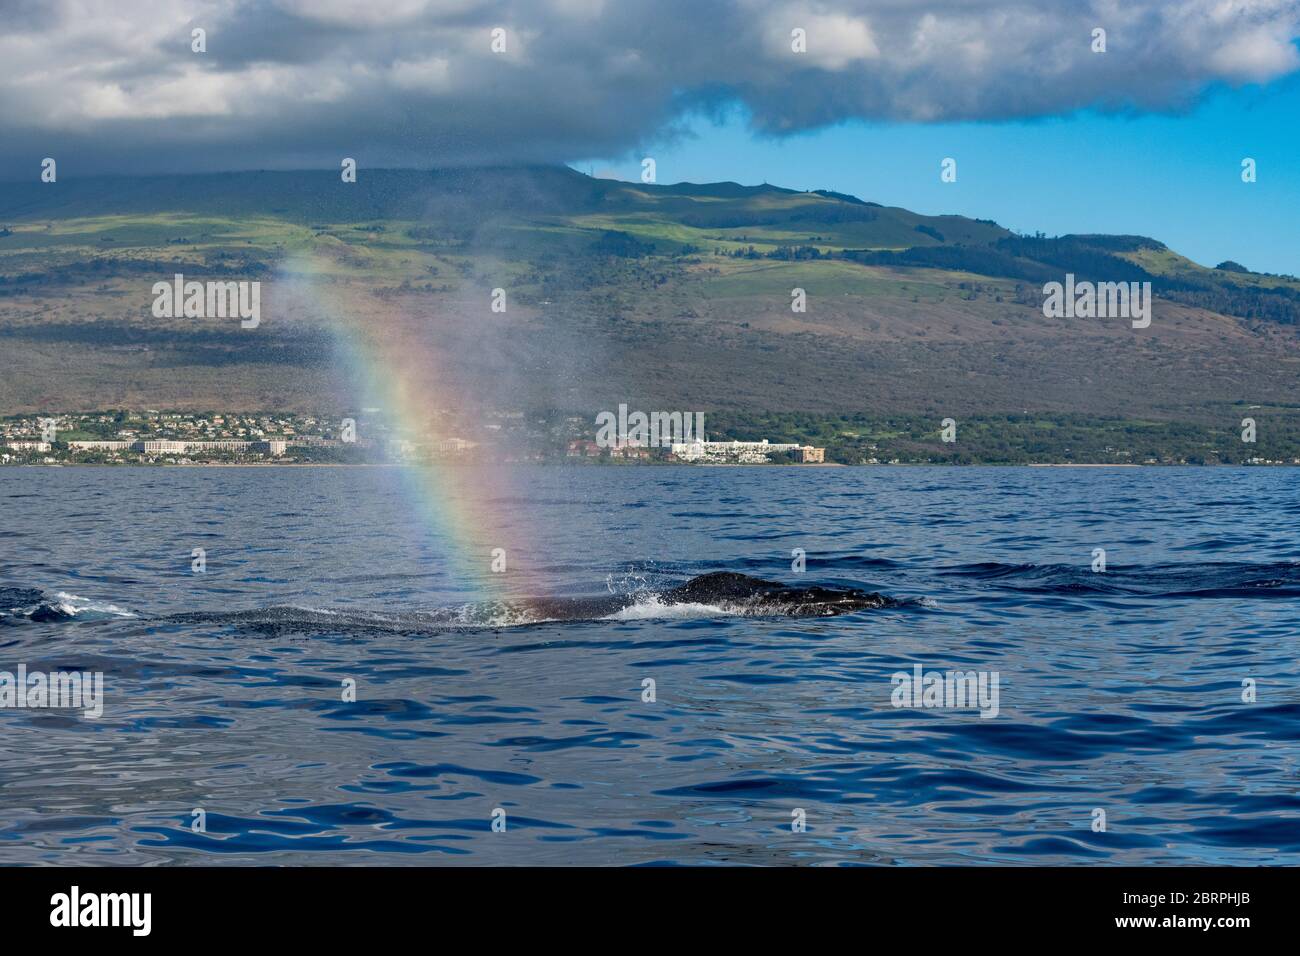 spout or blow from a humpback whale, Megaptera novaeangliae, hangs in the air, refracting a whale mist rainbow or whalebow, Kihei, Maui, Hawaii, Hawai Stock Photo